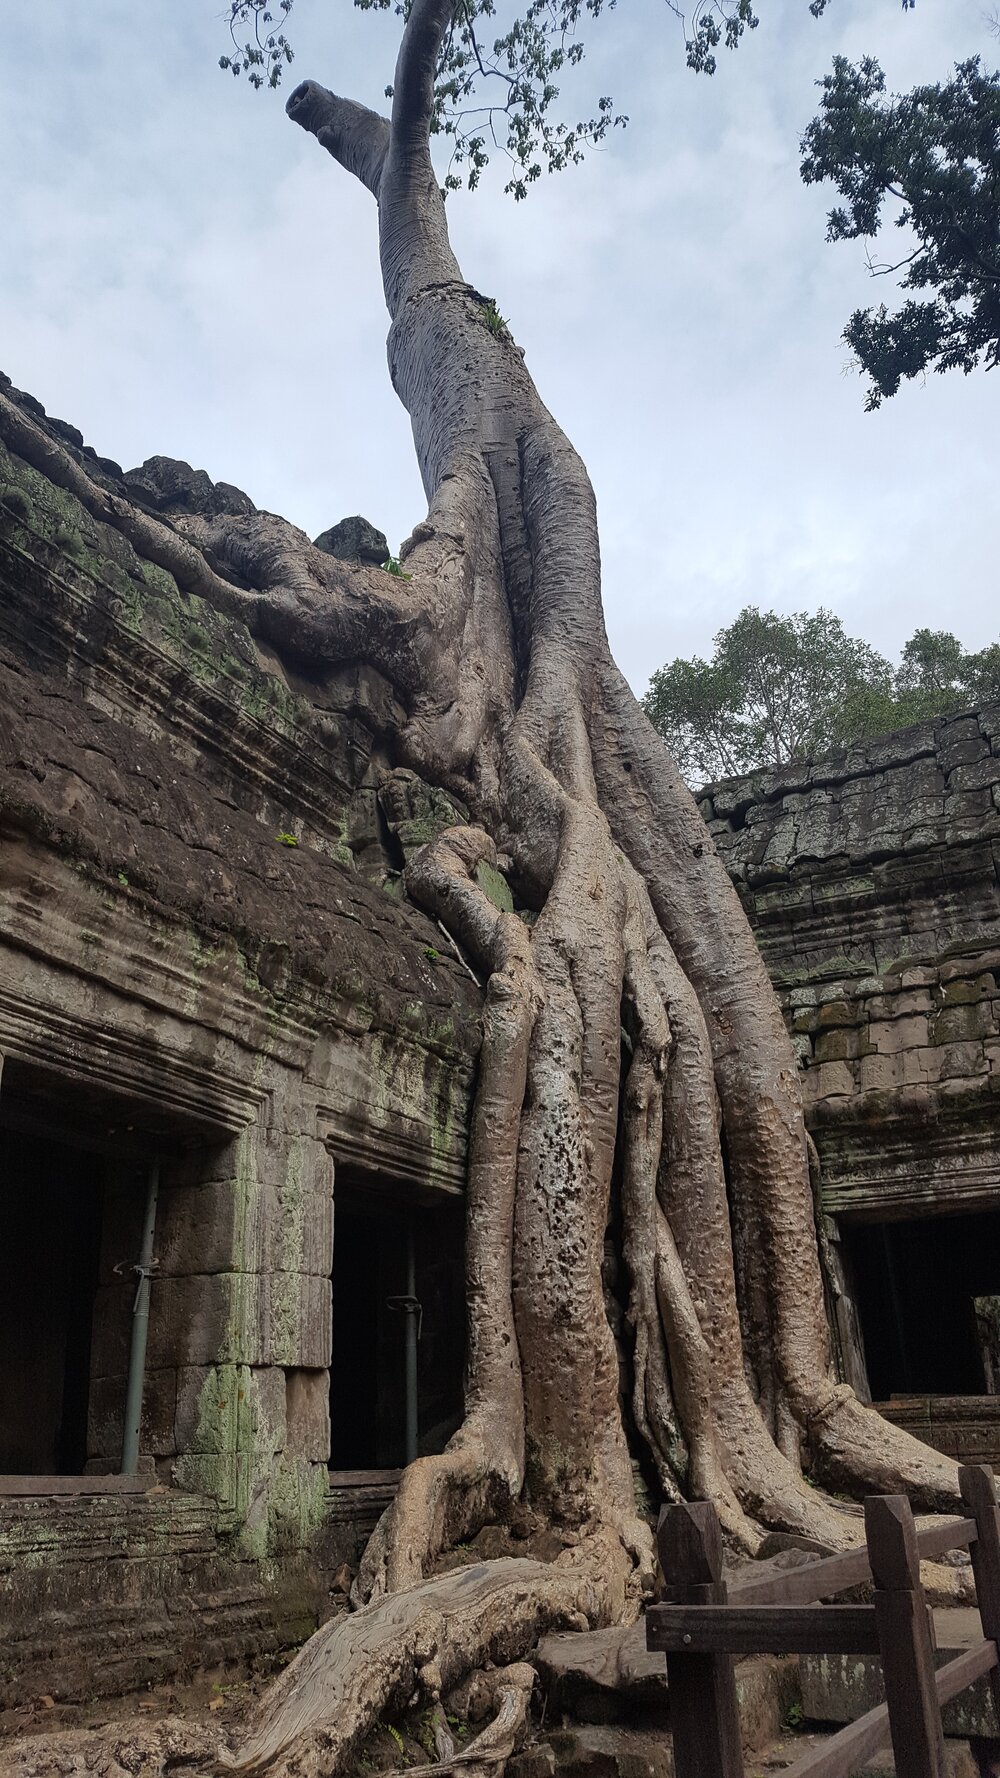 Uprooted trees at Ta Prohm